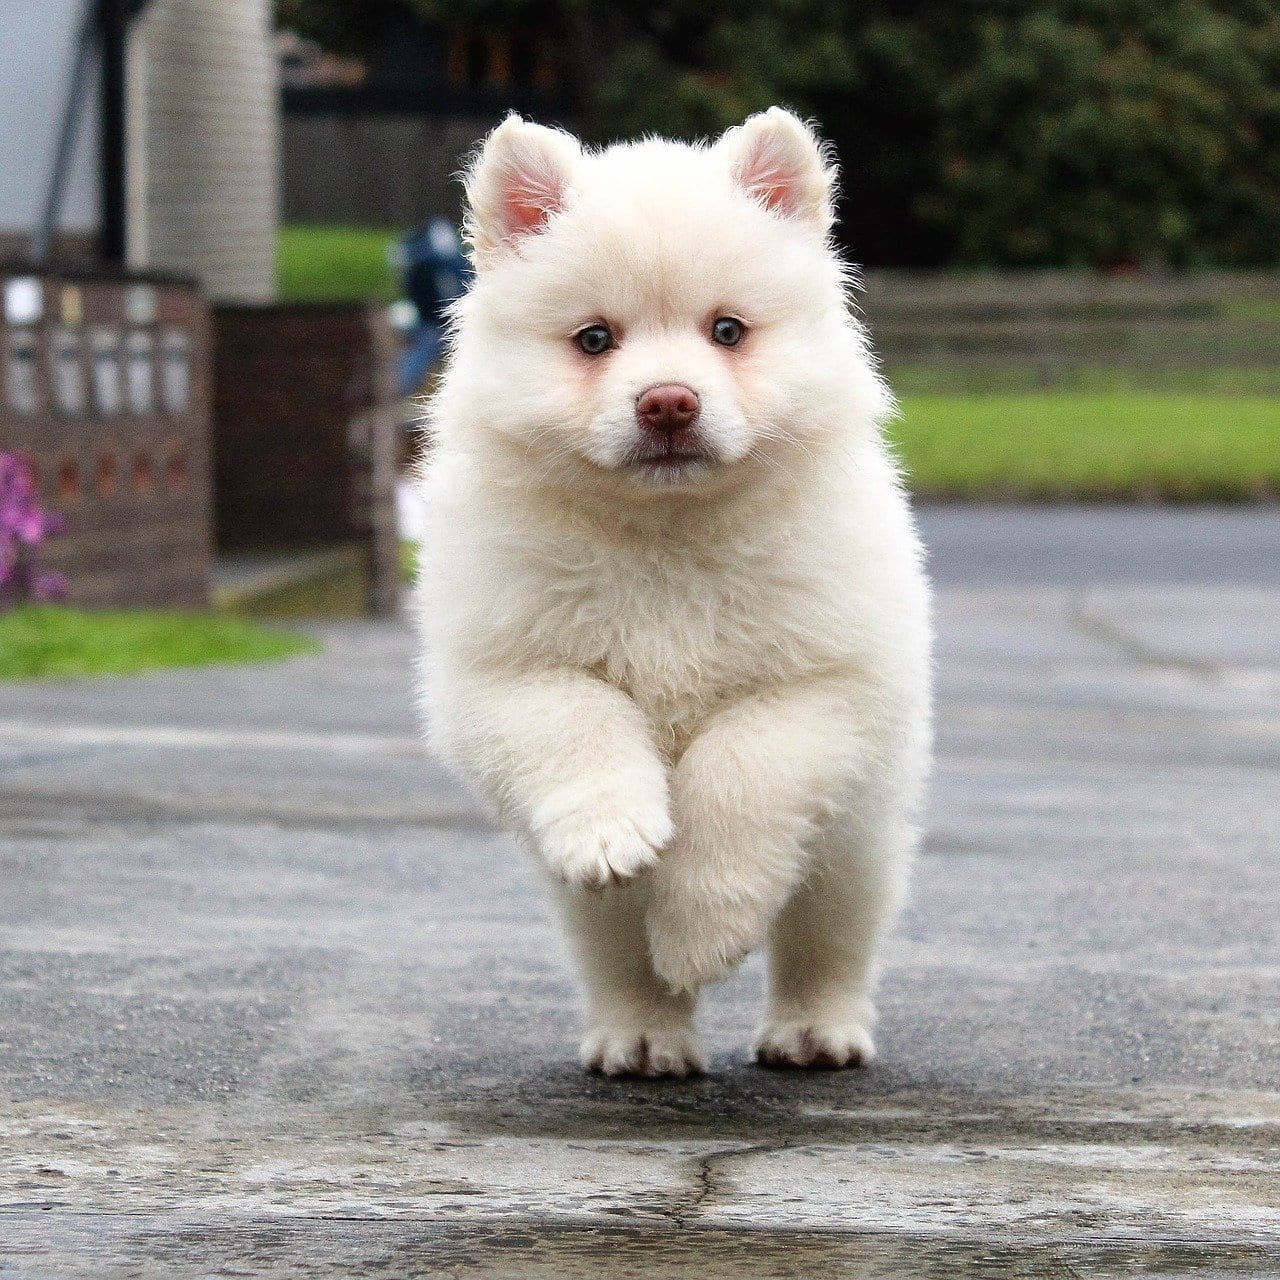 white puppy running in a driveway.